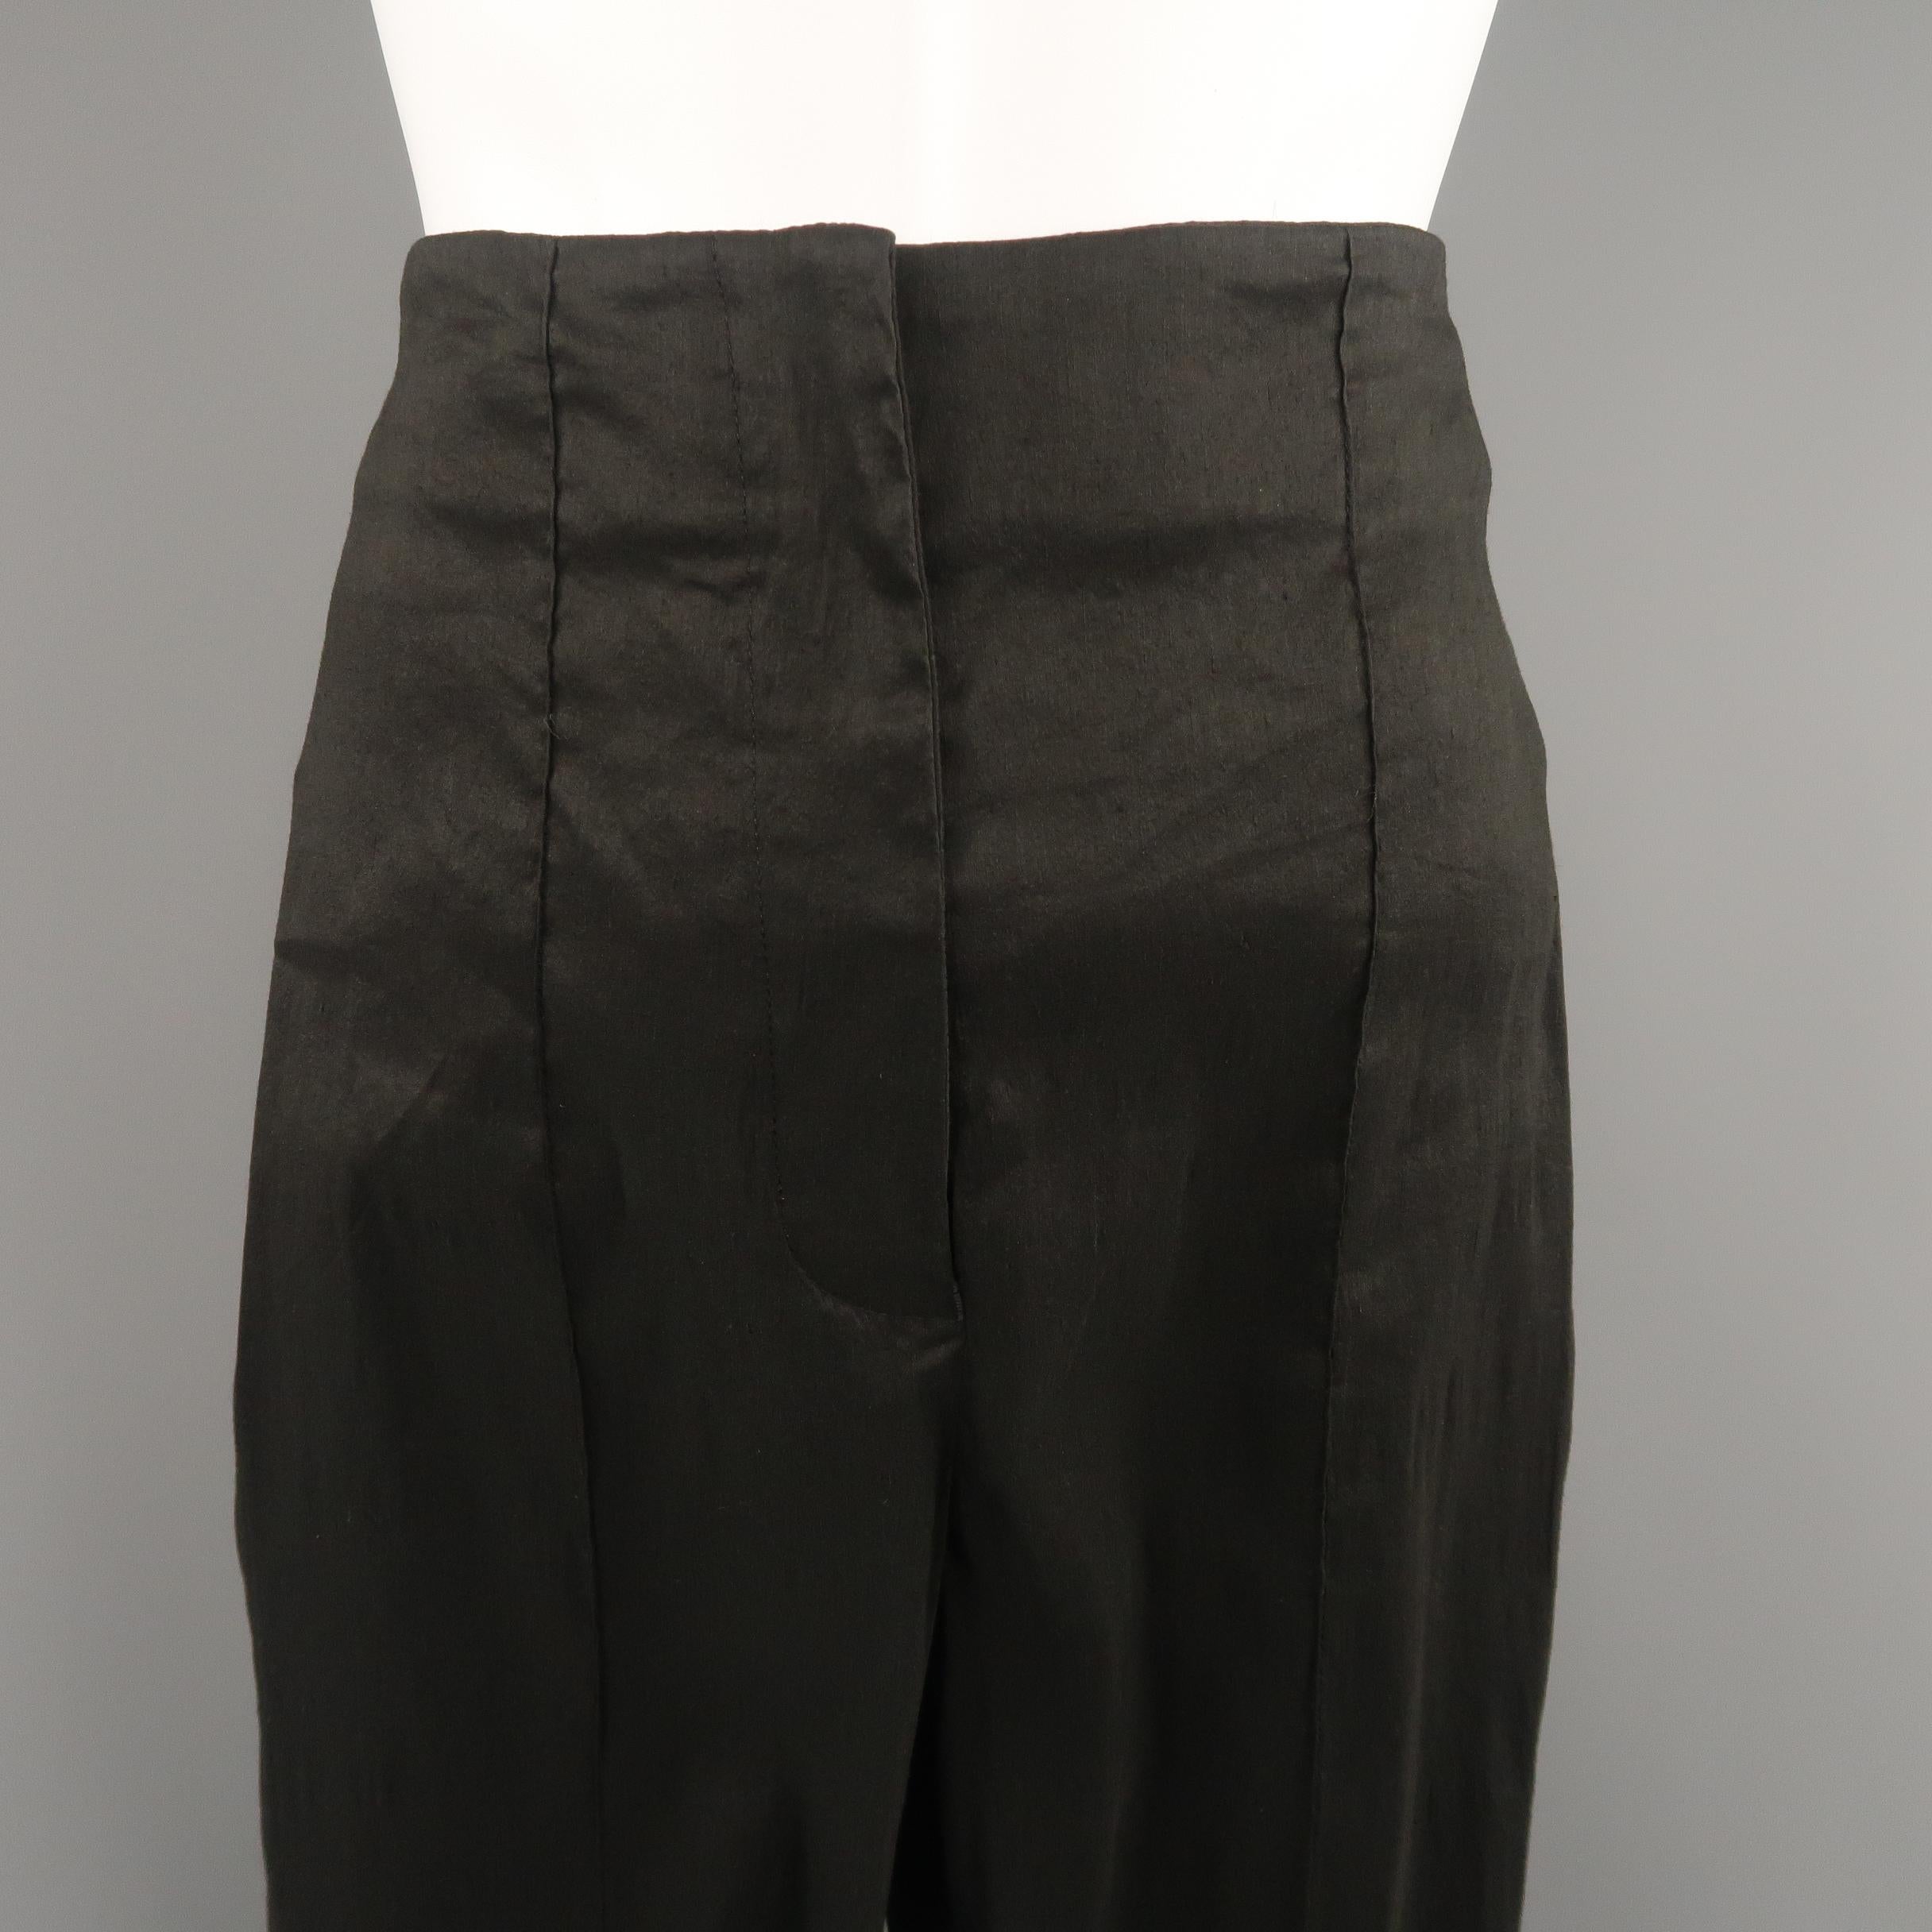 HAIDER ACKERMANN pants come in winkle textured stretch linen with a high rise, seamed flat front, and super fitted silhouette. Made in Portugal.
 
Excellent Pre-Owned Condition.
Original retail price: $620.00
Marked: IT 38
 
Measurements:
 
Waist: